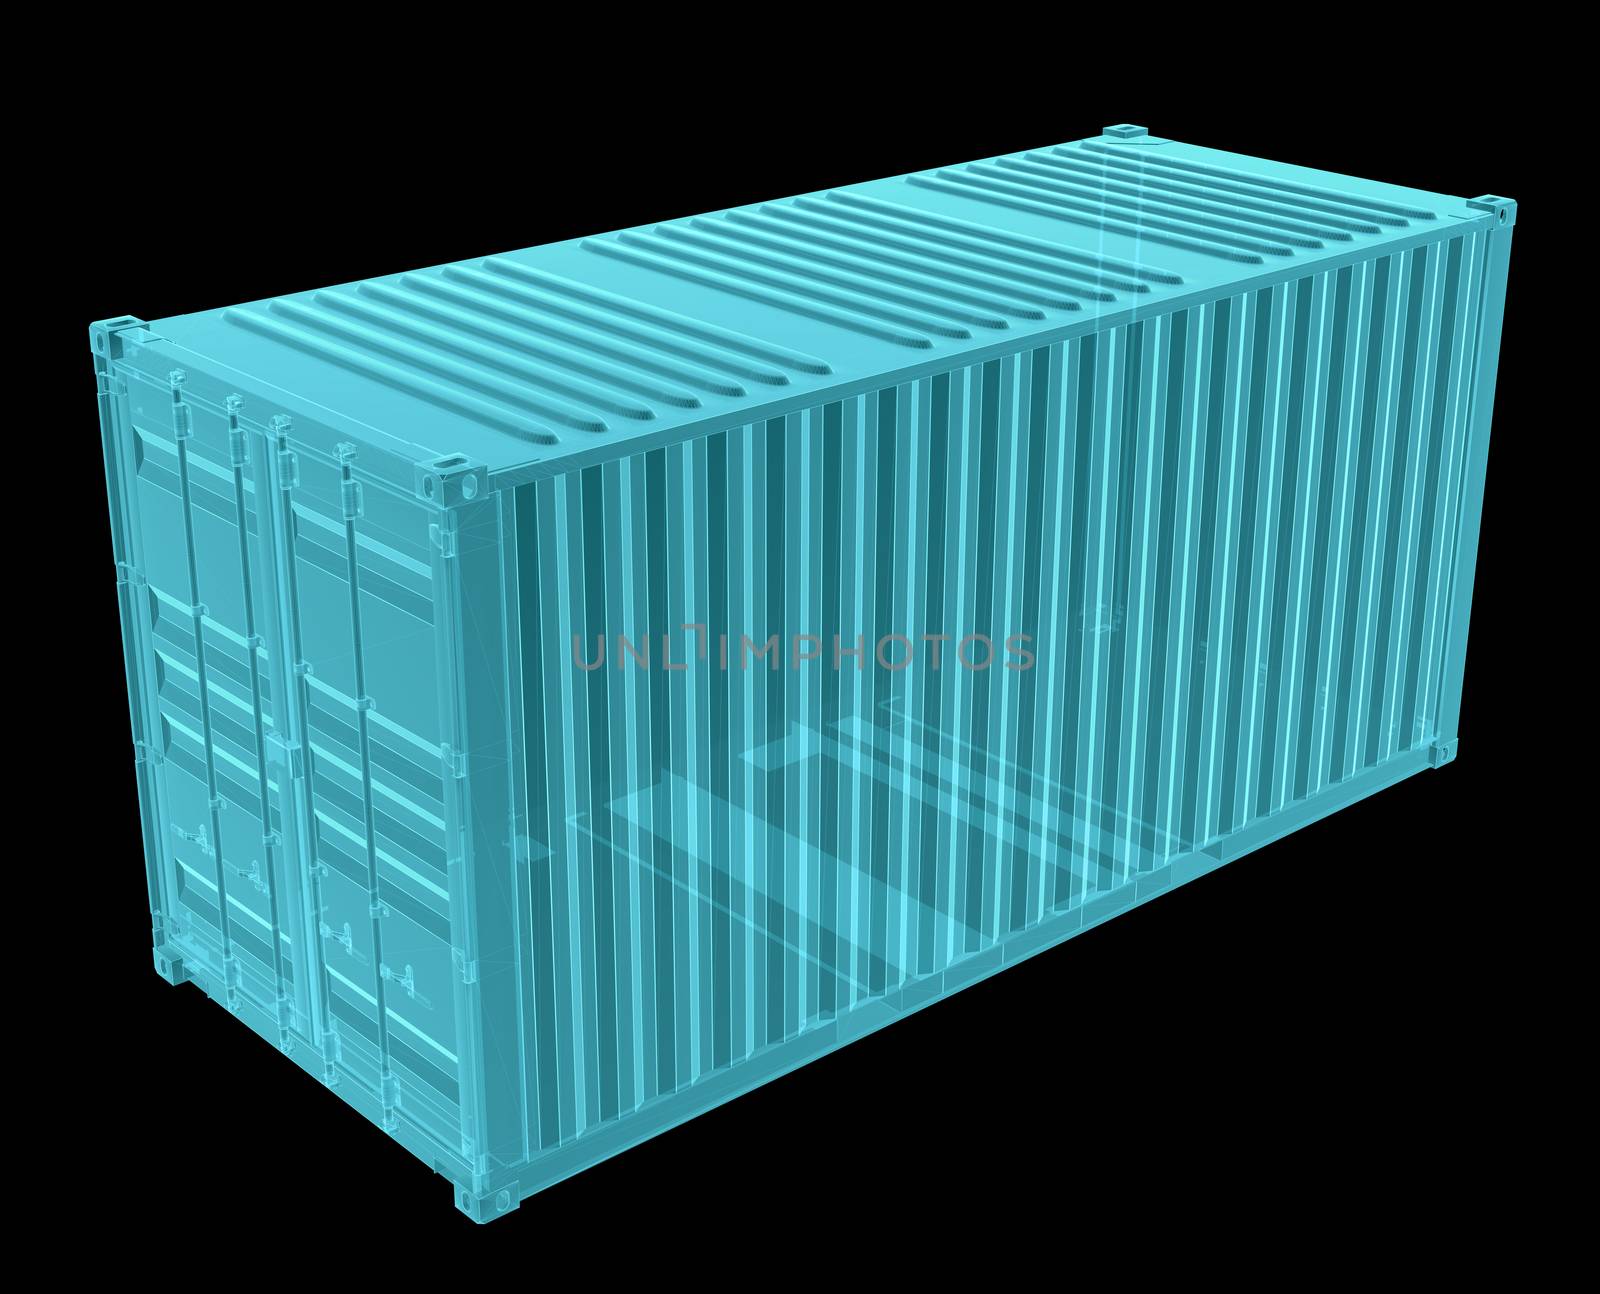 X-Ray Image Of Shipping container. Isolated on black. 3D Illustration